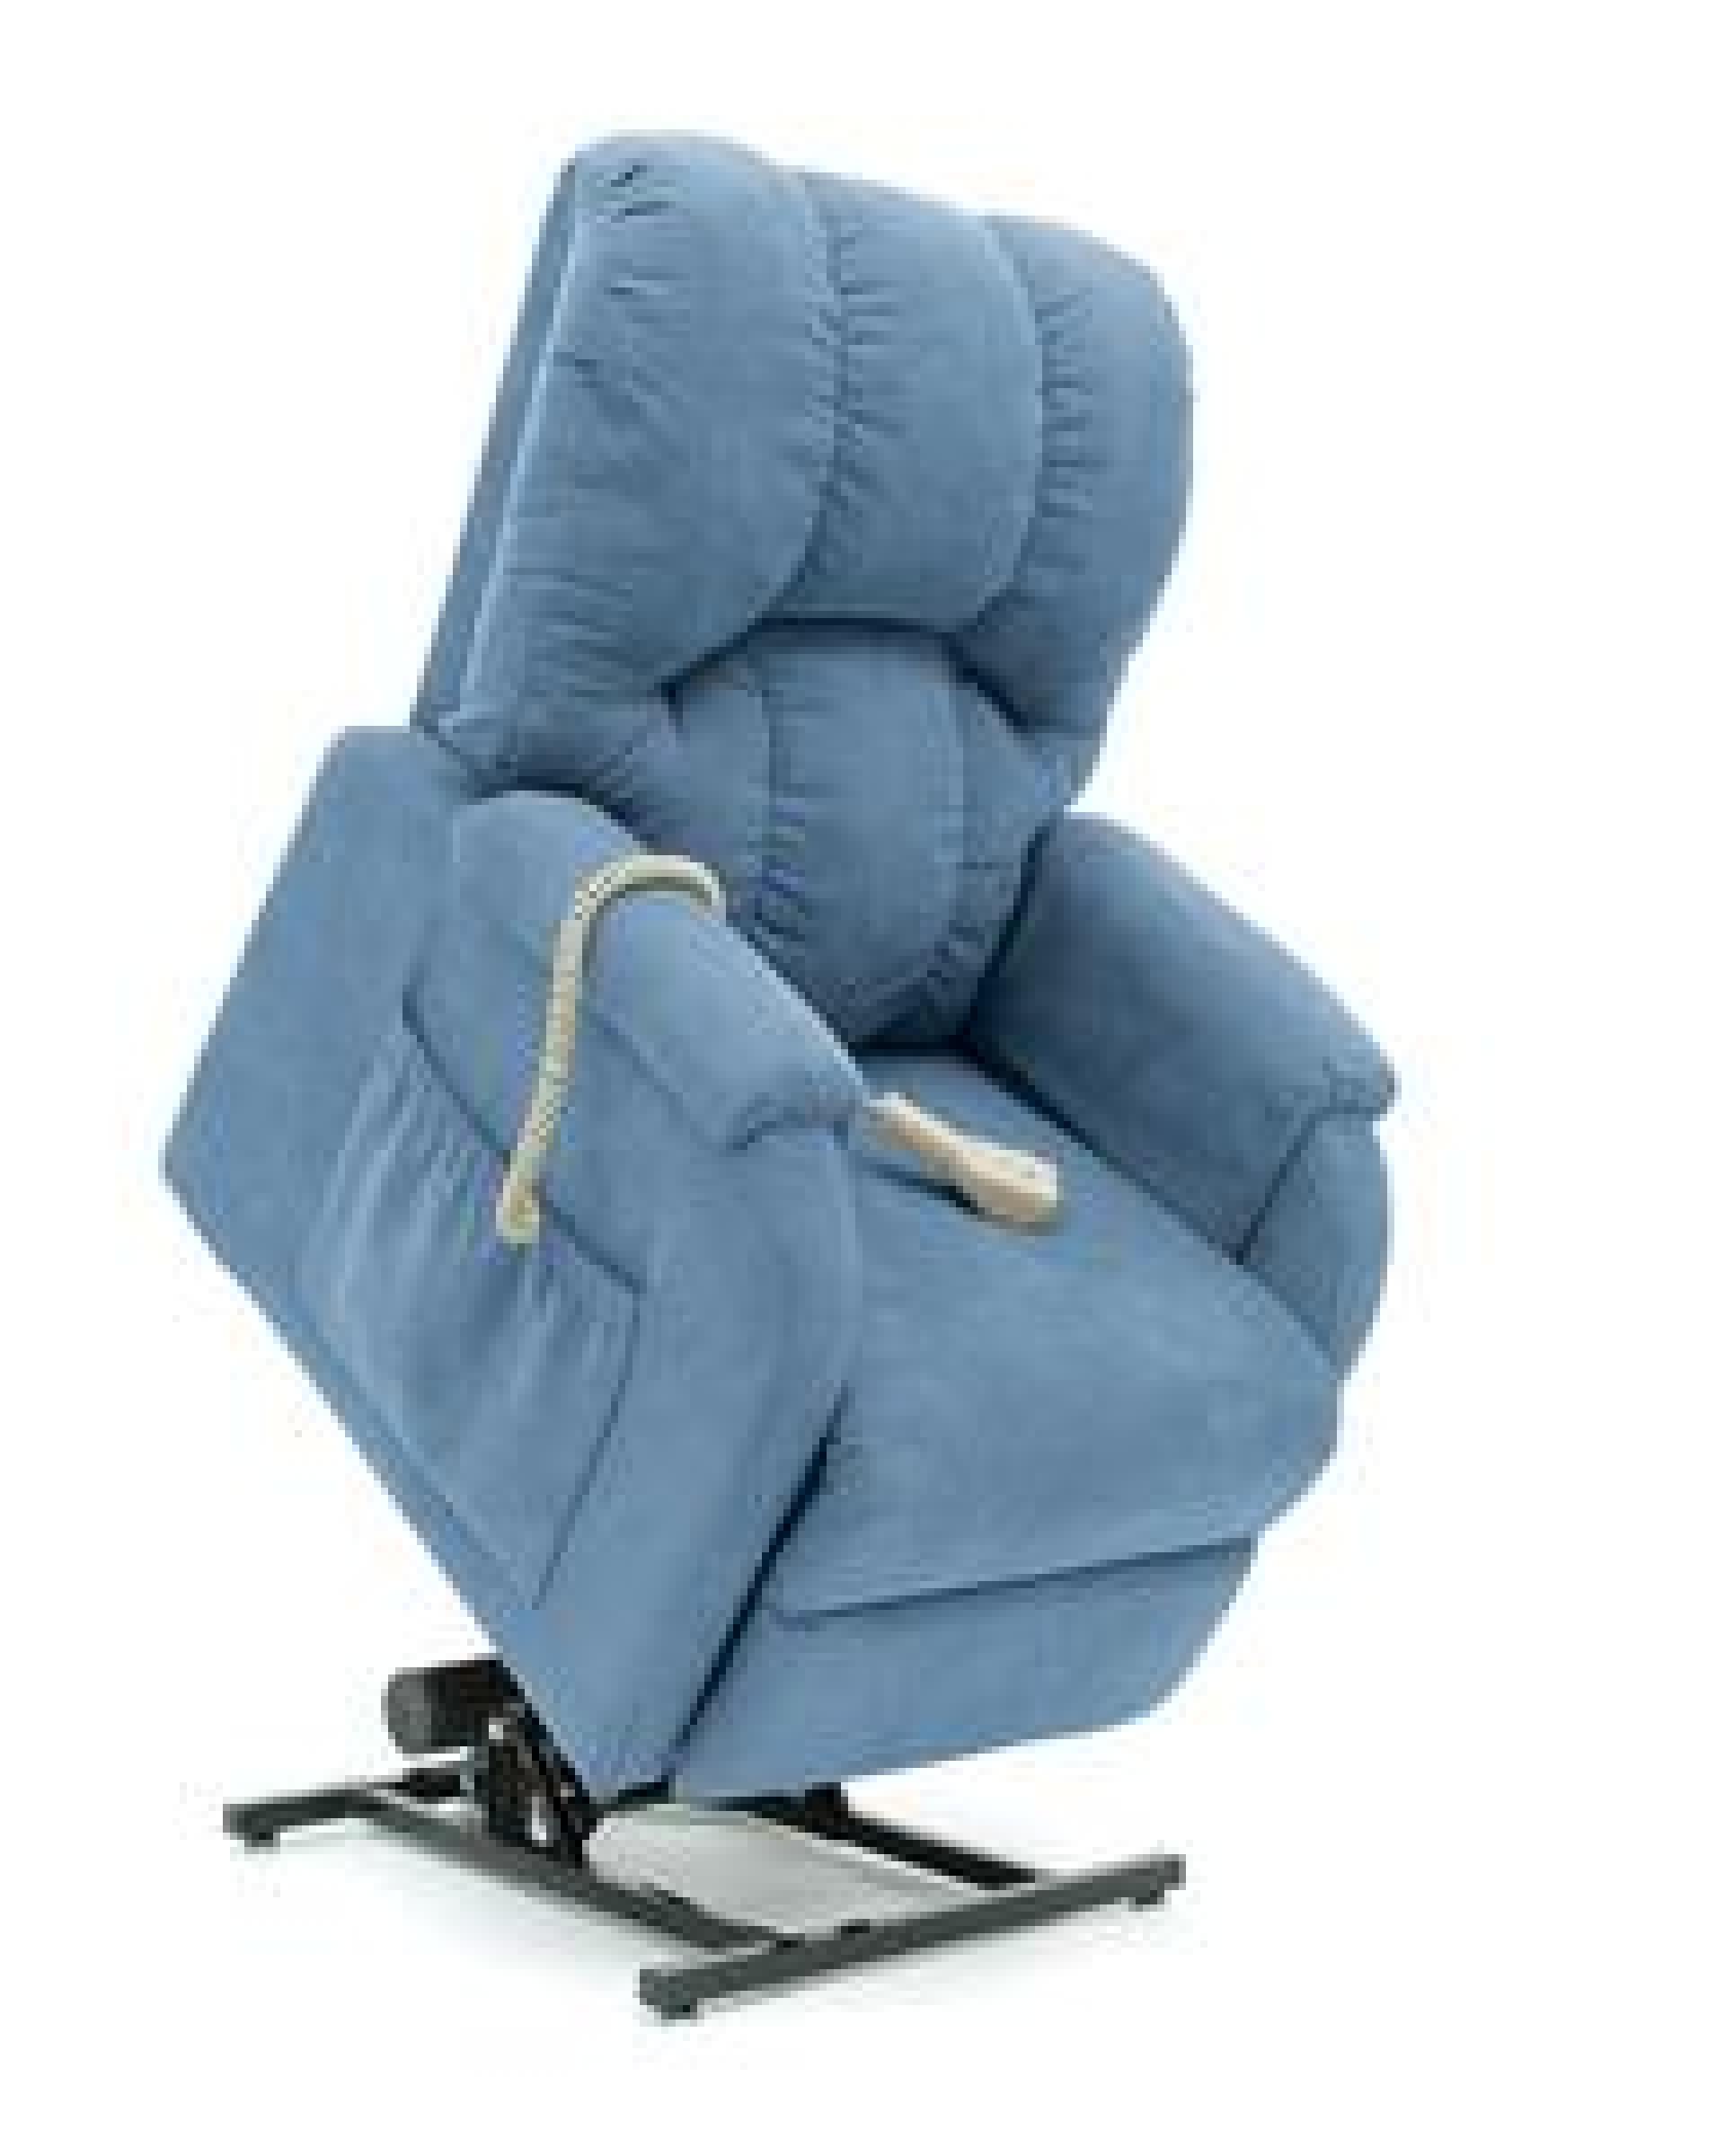 Pride Lift Chair C1 3 Position Chair With Fully Removable Upholstery Components 163cm Below Providing The Best In Mobility And Homecare Products First Choice Mobility